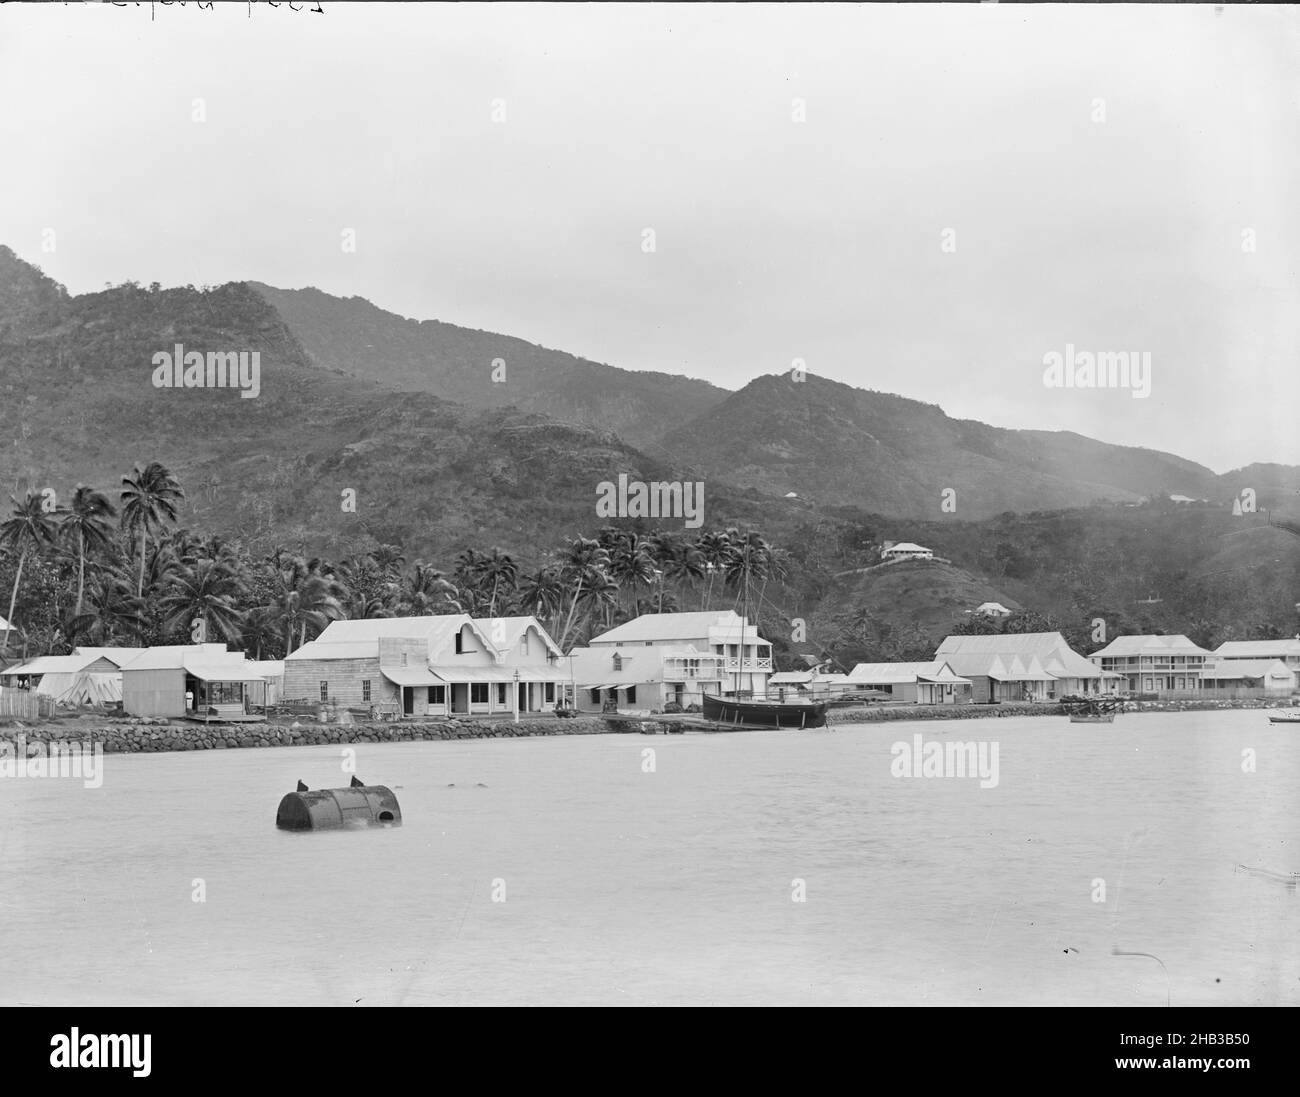 [Levuka, Fiji], Burton Brothers studio, photography studio, 14 July 1884, New Zealand, black-and-white photography, Second plate in three plate panorama taken from the jetty. Foreground sea running to seawall with road above, buildings on roadside, coconut trees behind buildings (from centre to left) and steep hill rising behind buildings. To right a cylindrical buoy floats in the sea, a longboat is sitting on the shoreline. The hill line drops away left to right Stock Photo